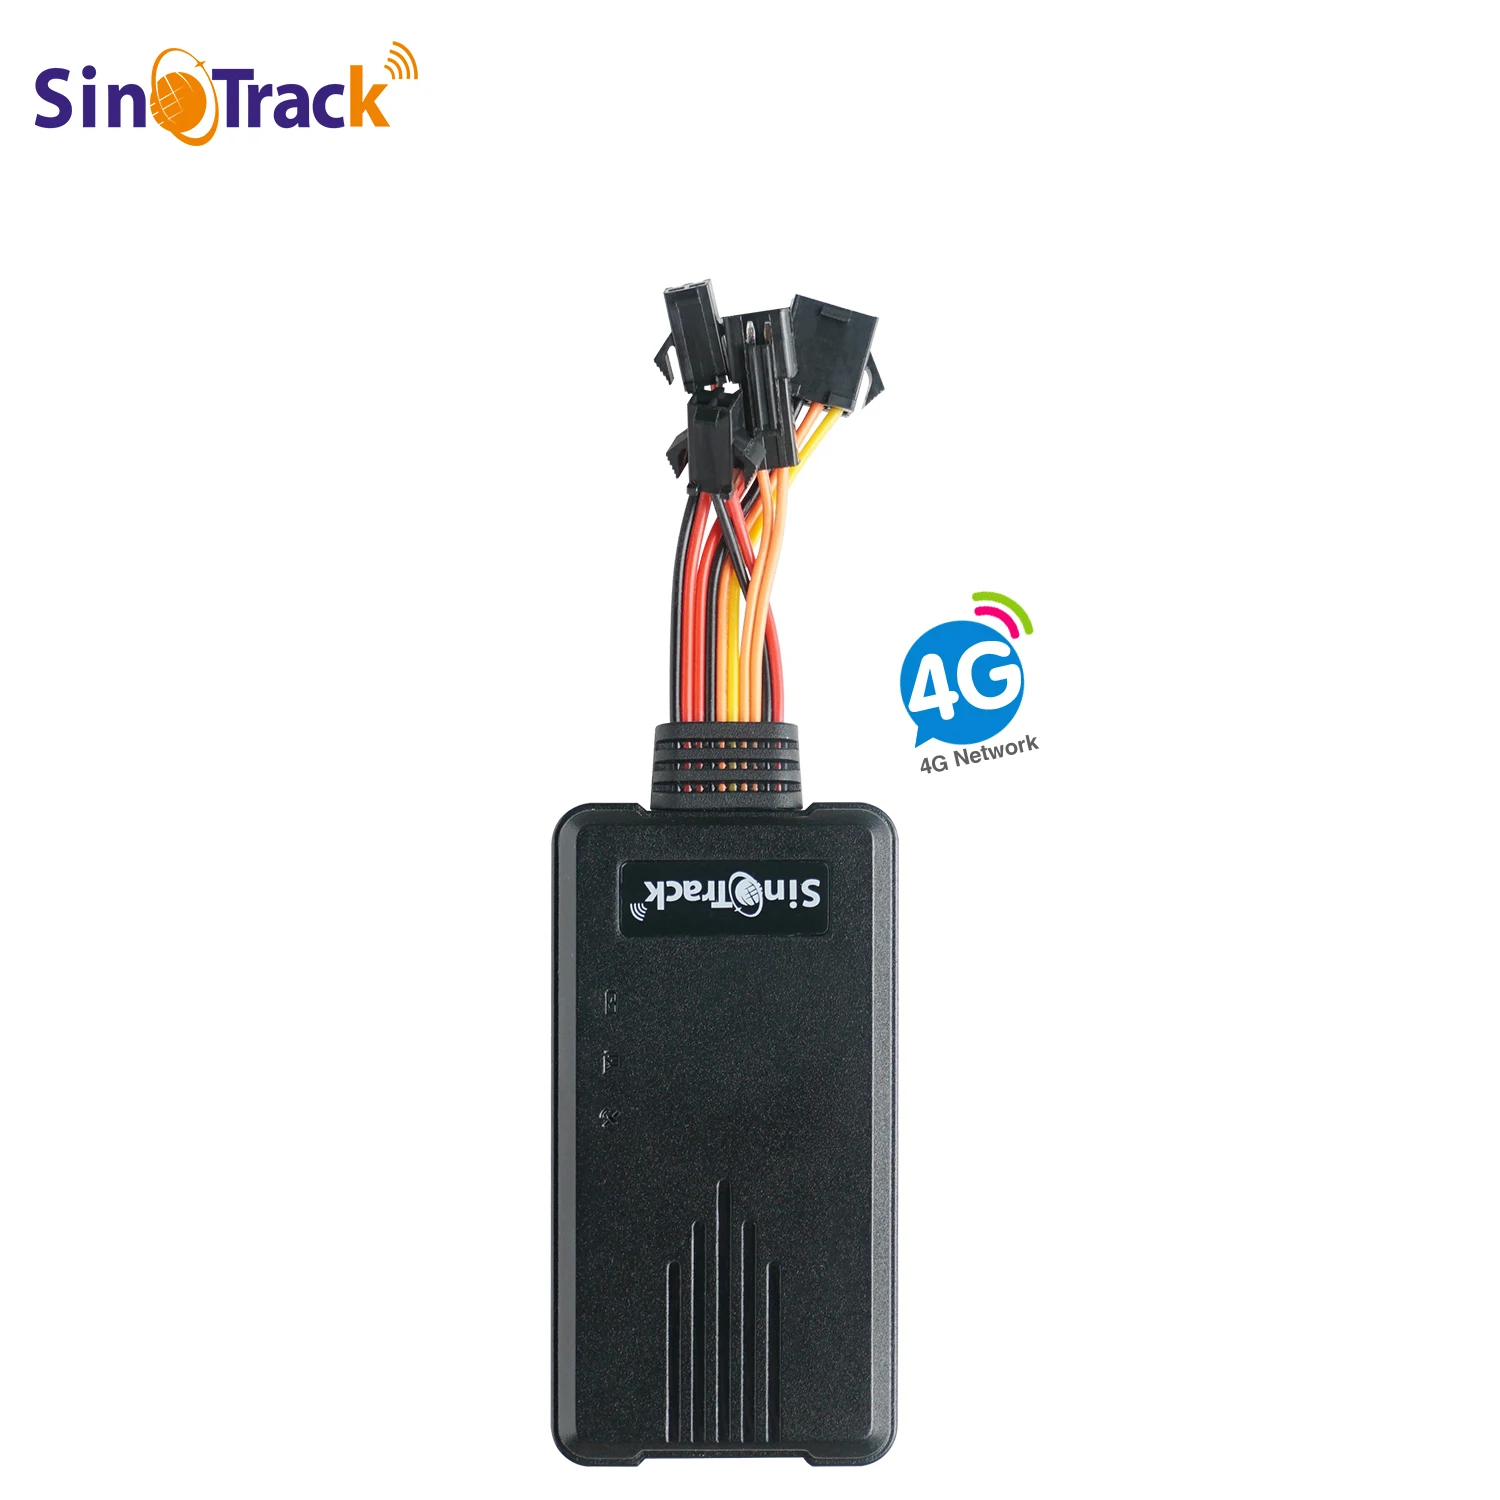 SinoTrack 4G GPS Tracker ST-906L For Car Motorcycle Vehicle Tracking Dev... - $26.80+